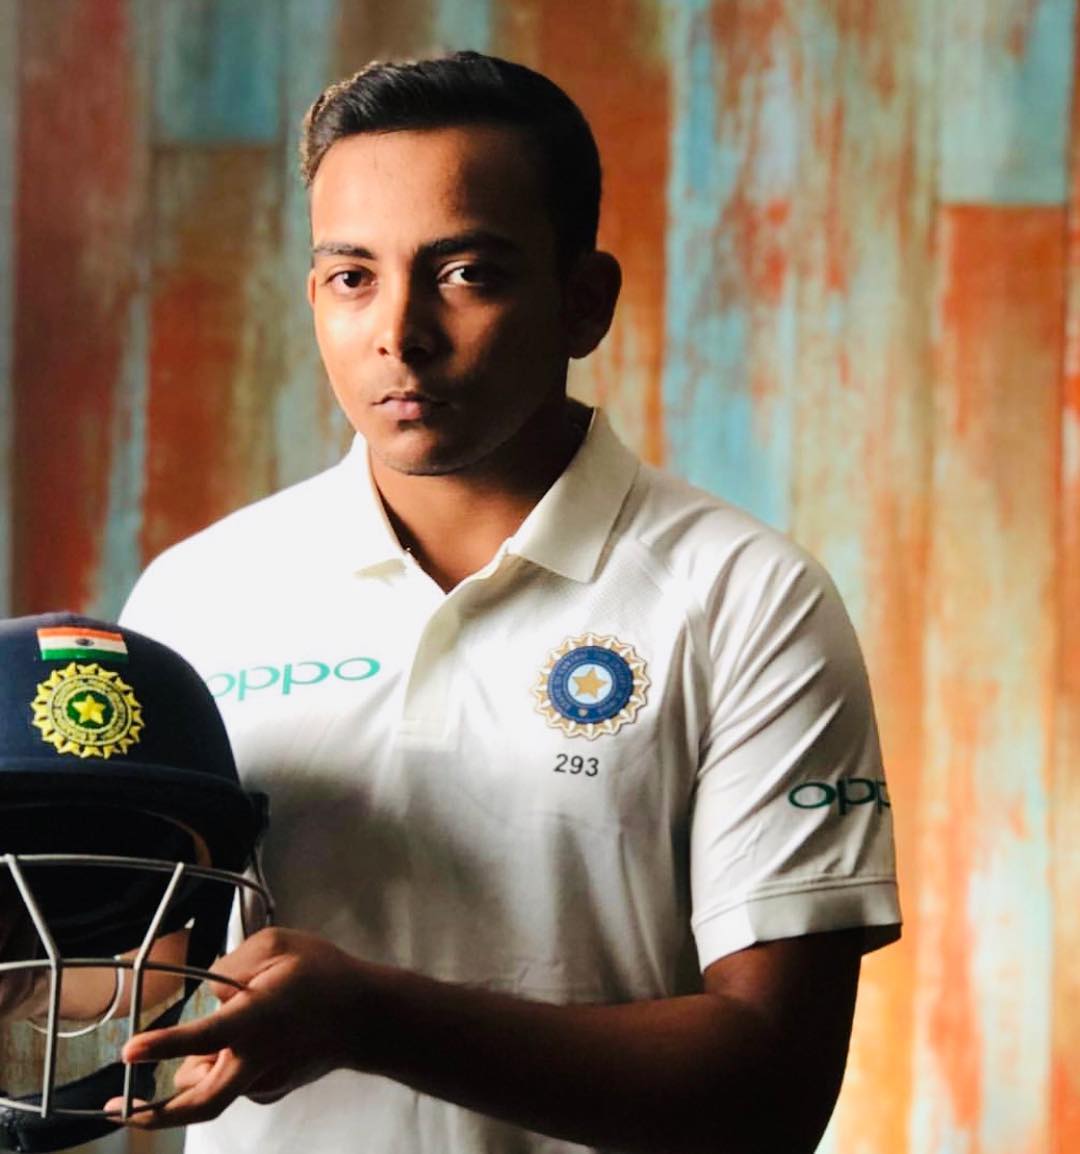 Prithvi Shaw Hairstyle 11 Cricketer Prithvi Shaw hairstyles | Hairstyles of Prithvi Shaw | Indian Crickter Prithvi Shaw hairstyles Prithvi Shaw Hairstyles